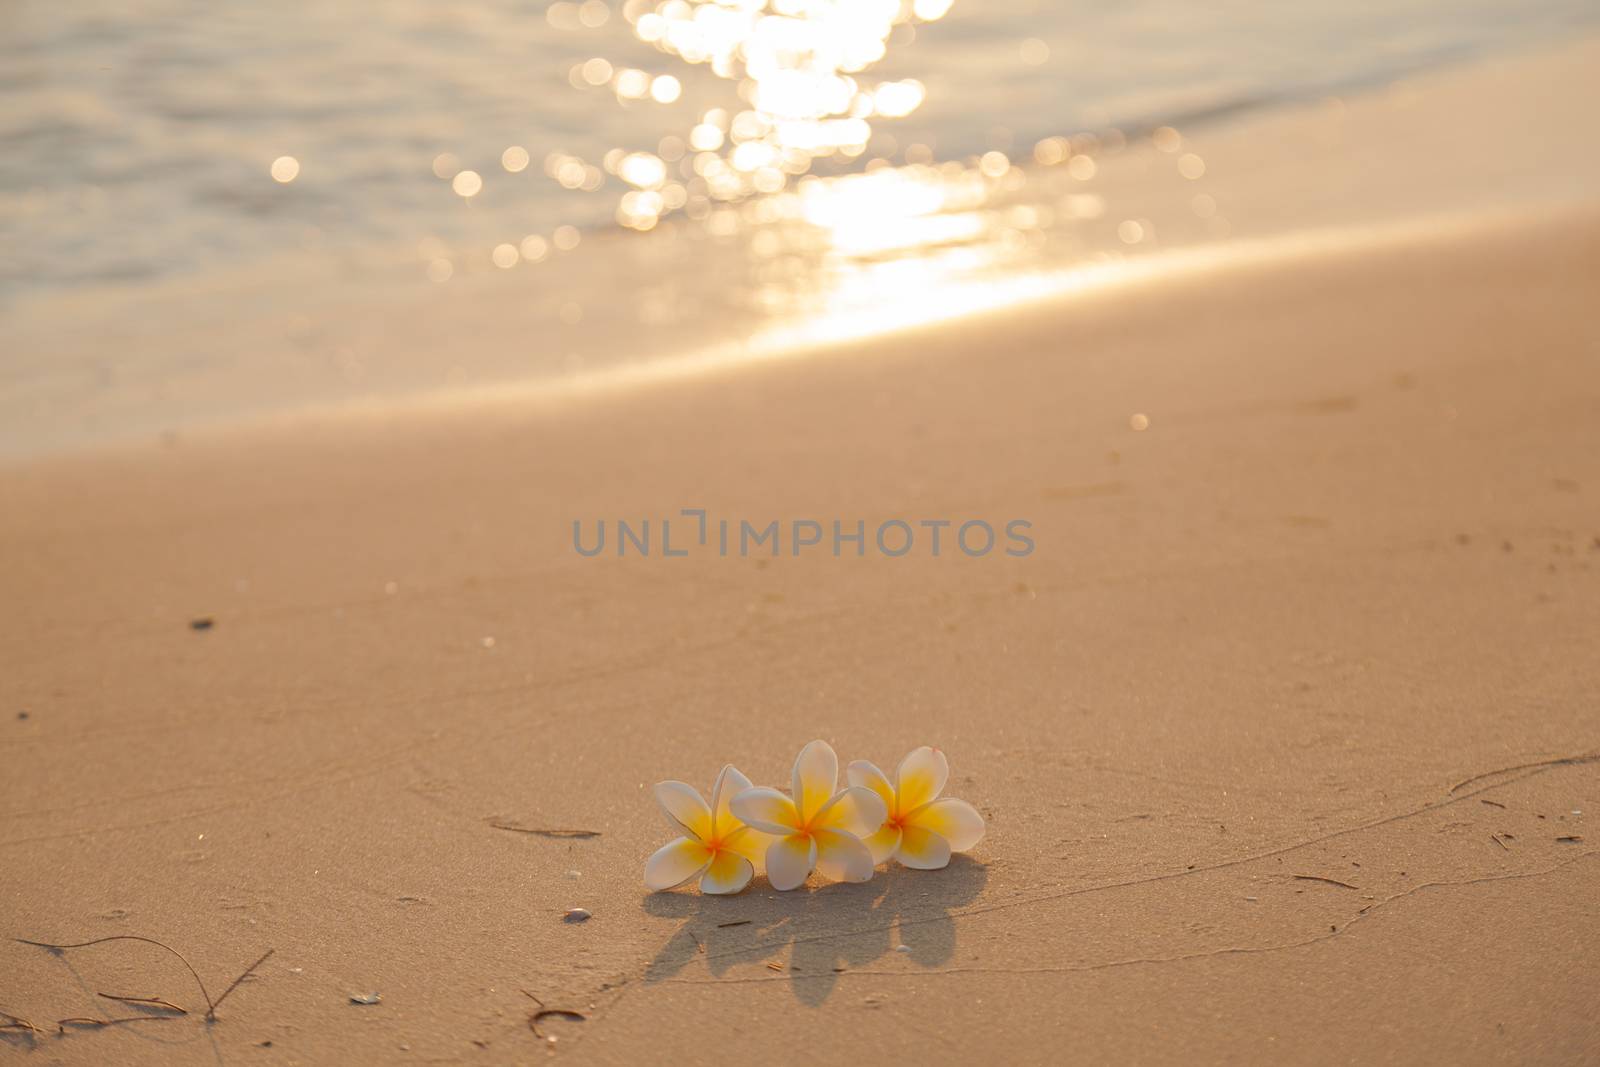 Flower on the sand. White flower on the beach in the morning sunlight shining from behind.